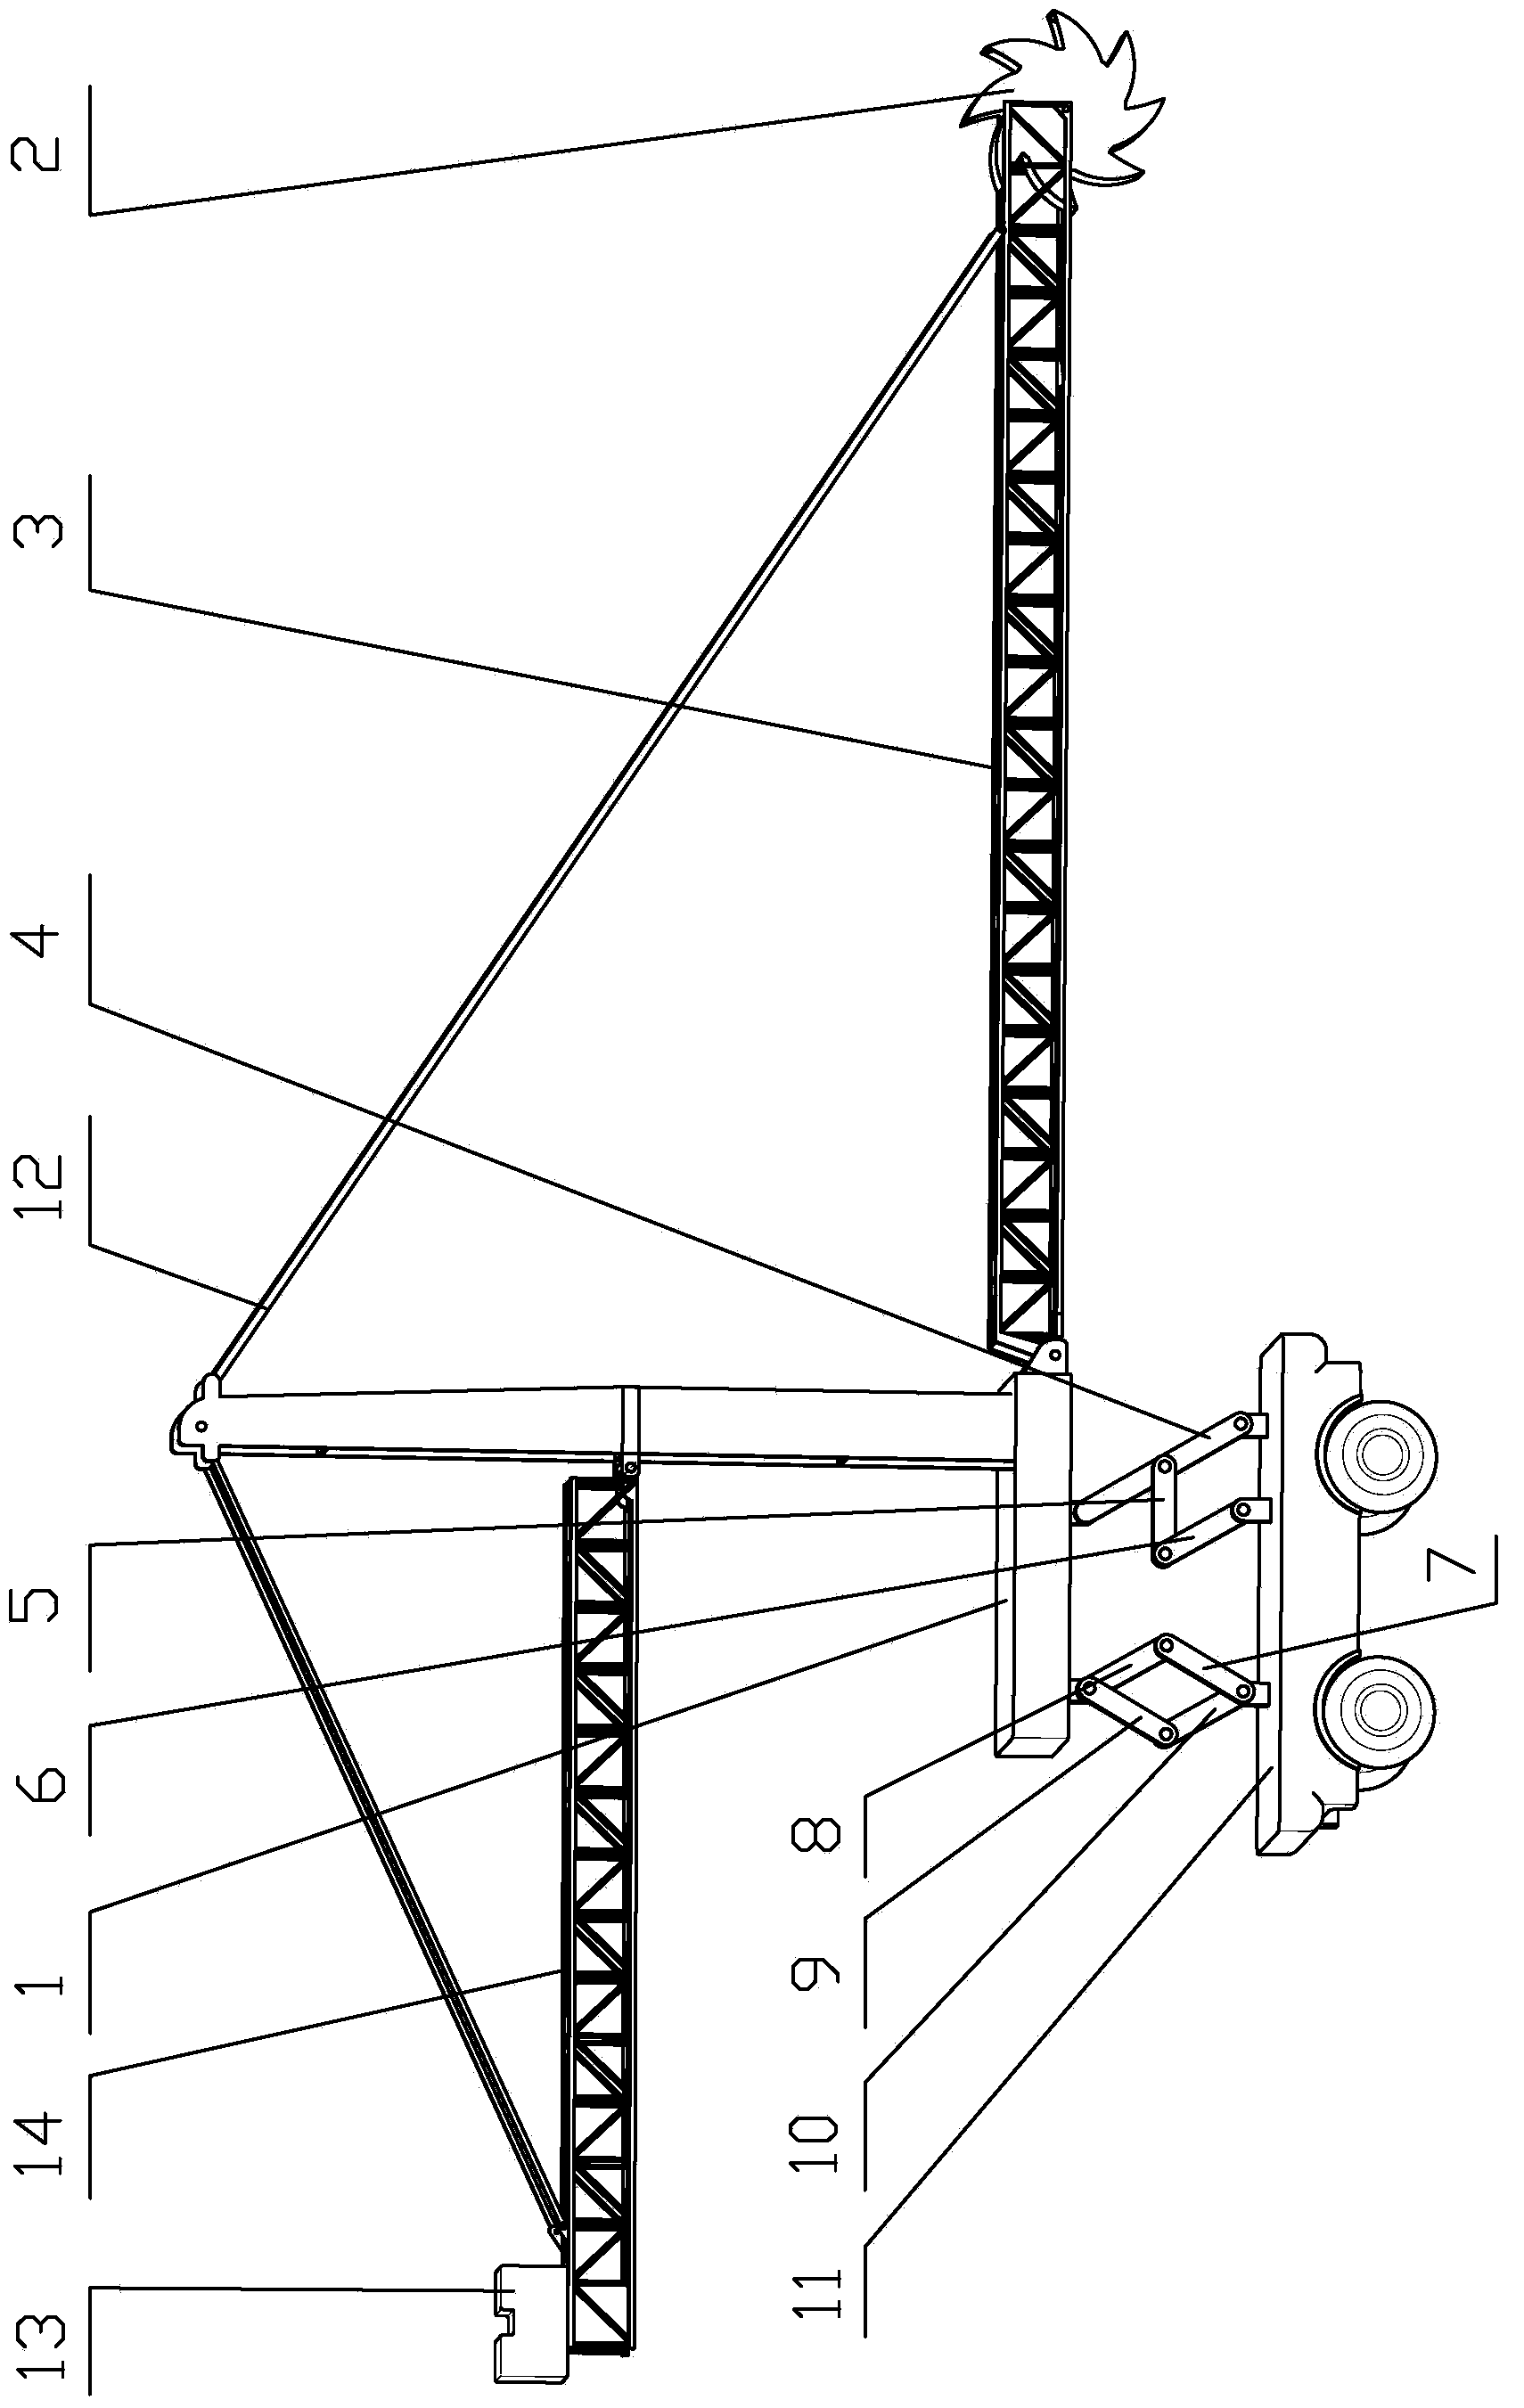 Hybrid-driven type bucket-wheel material stacking and taking machine